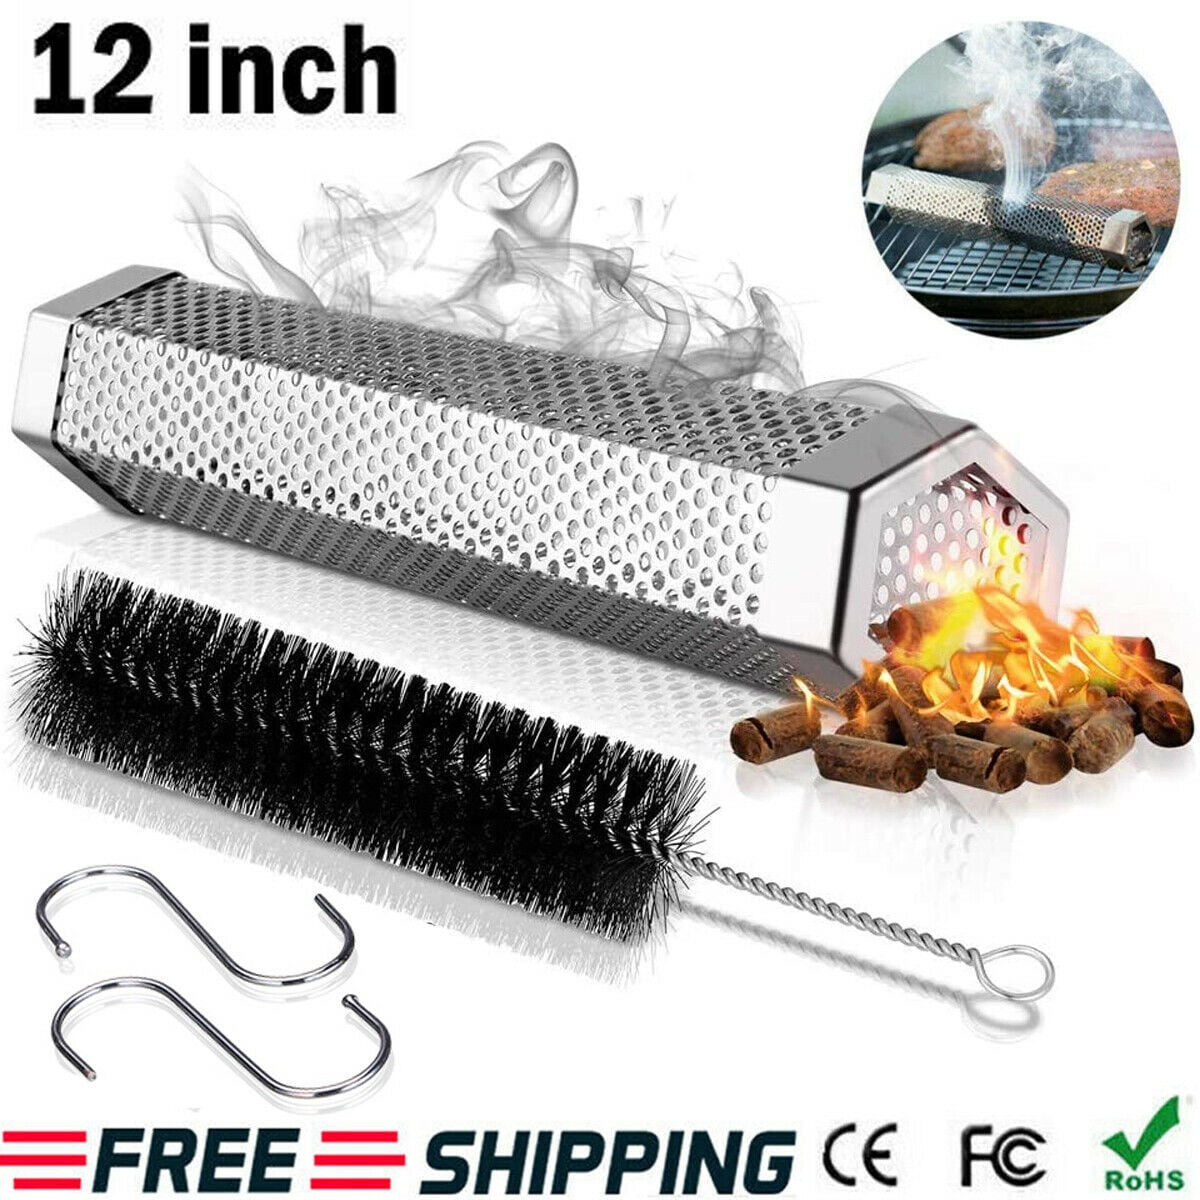 Details about   12" Stainless Steel Outdoor Wood Pellet Grill Smoker Filter Tube Pipe Smoke BBQ 